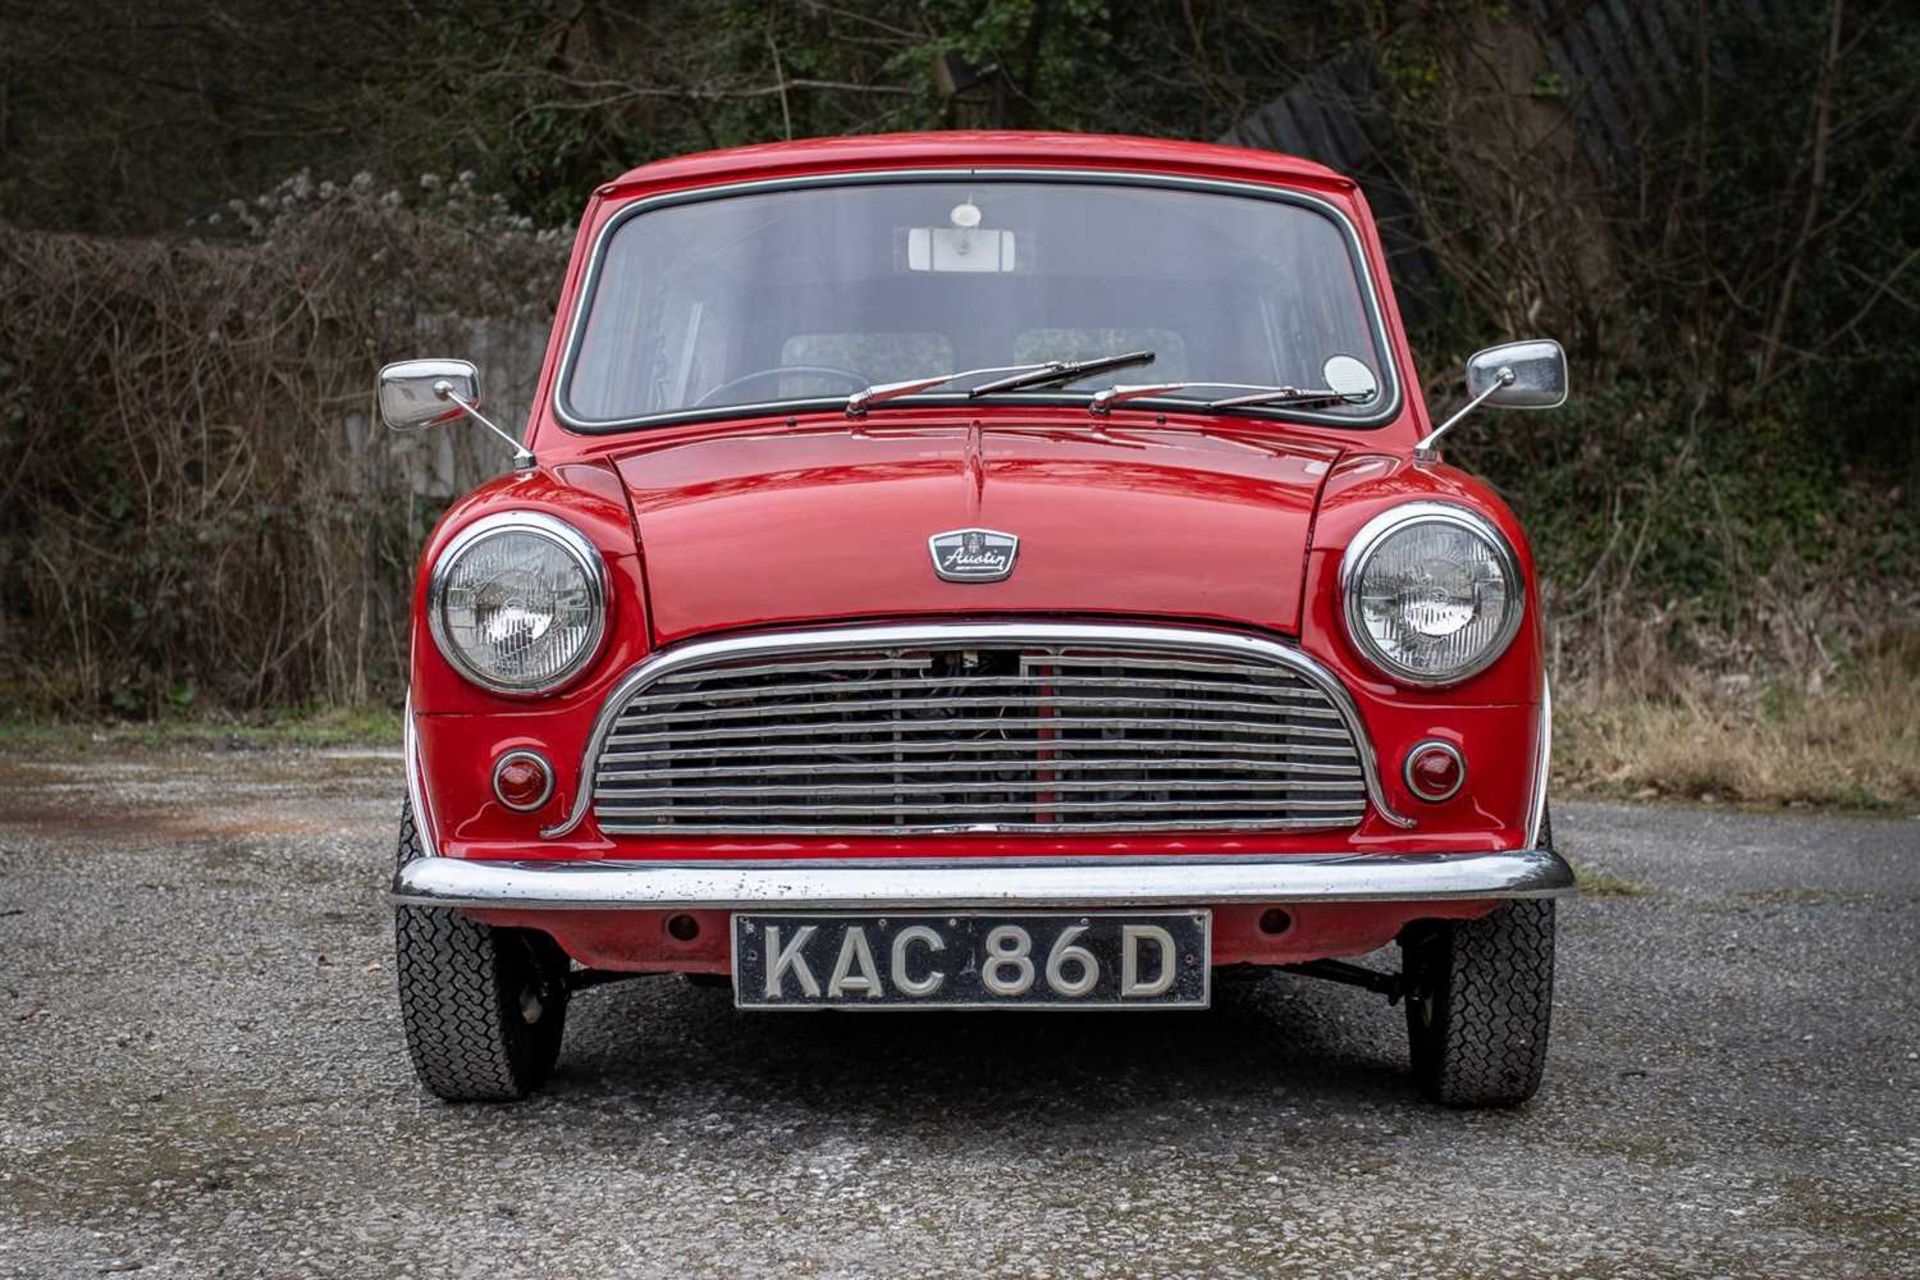 1966 Austin Mini Countryman Part of museum display in the Isle of Man for five years - Image 8 of 68